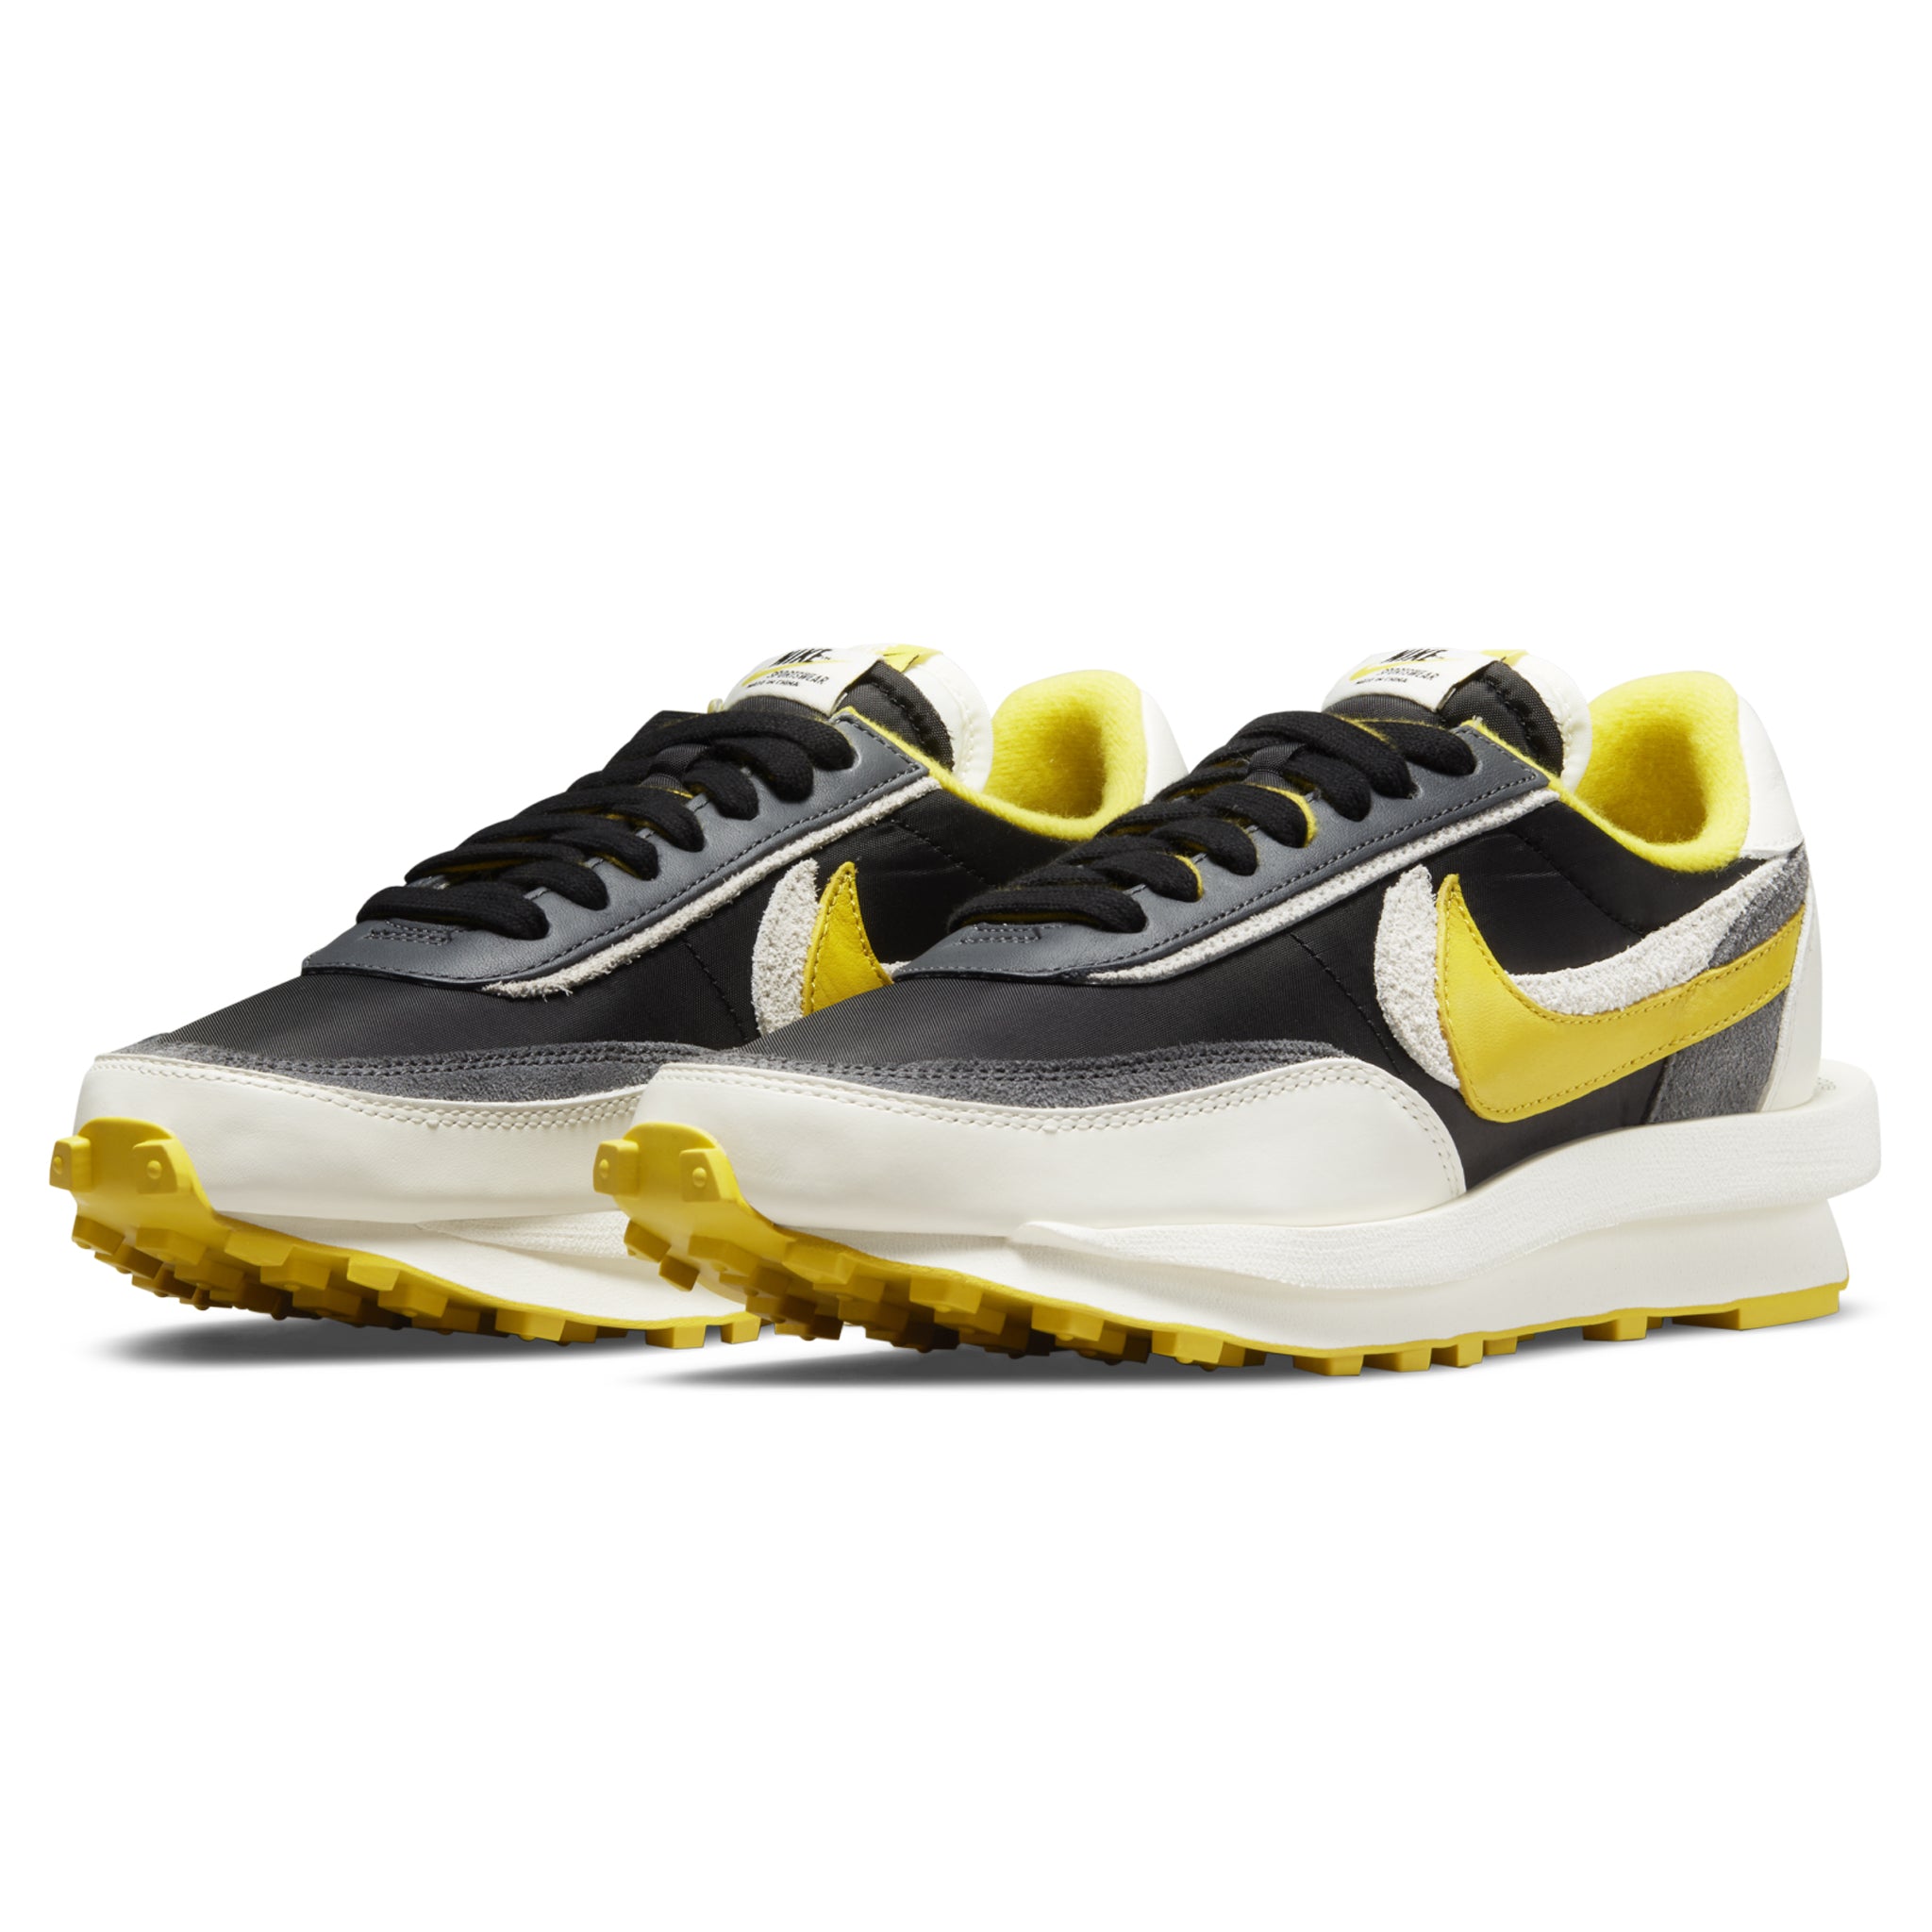 Front side view of Nike x Sacai LD Waffle Undercover Black Bright Citron DJ4877-001